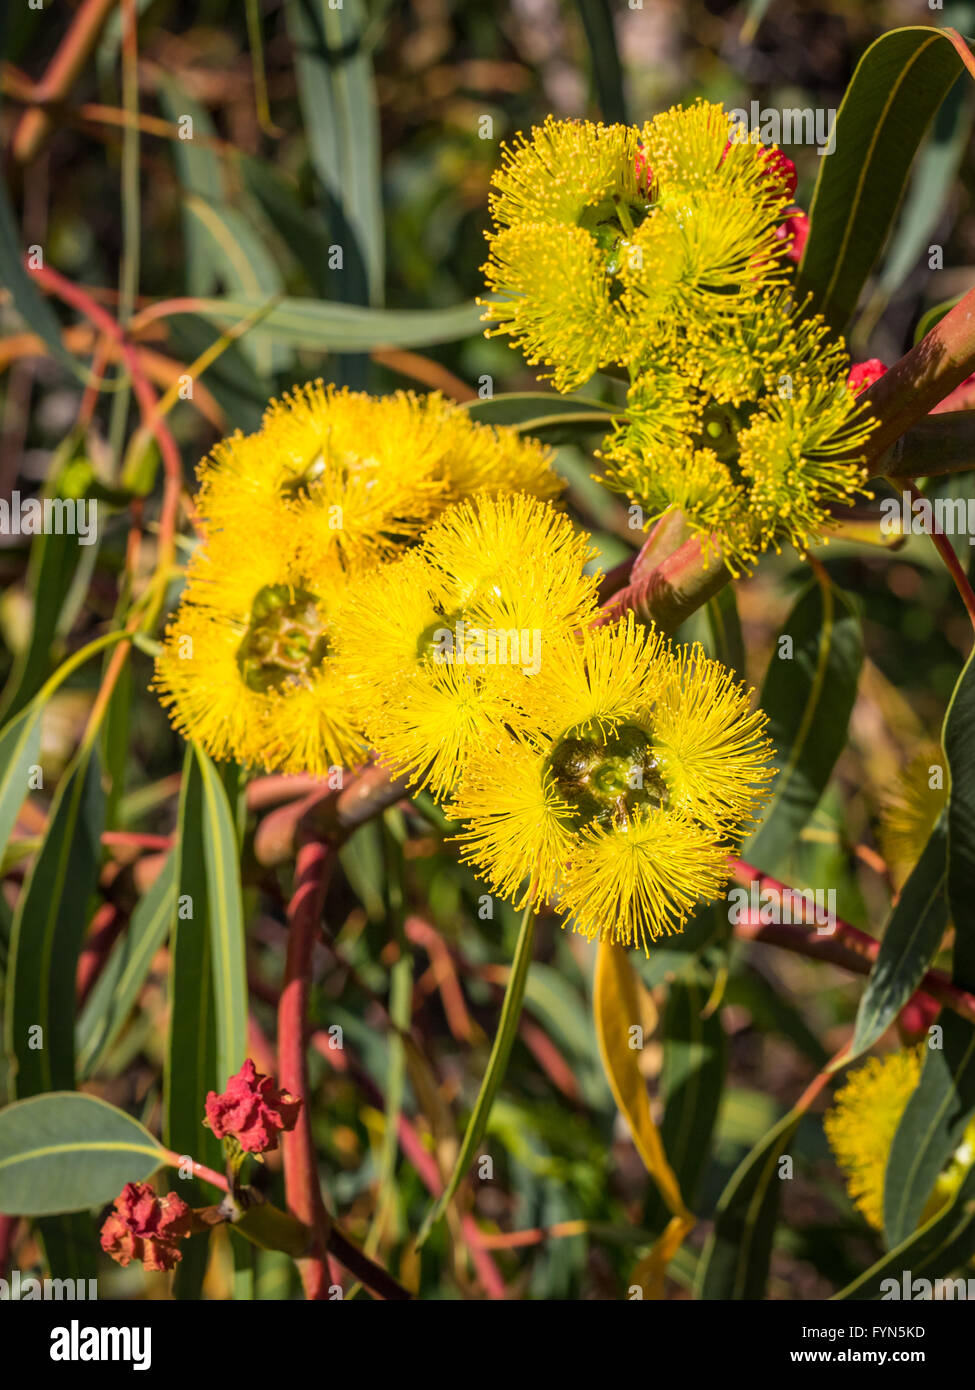 Widely seen around Perth and southern Western Australia, the Red-Capped Gum has stunning flowers in a distinctive yellow. Stock Photo